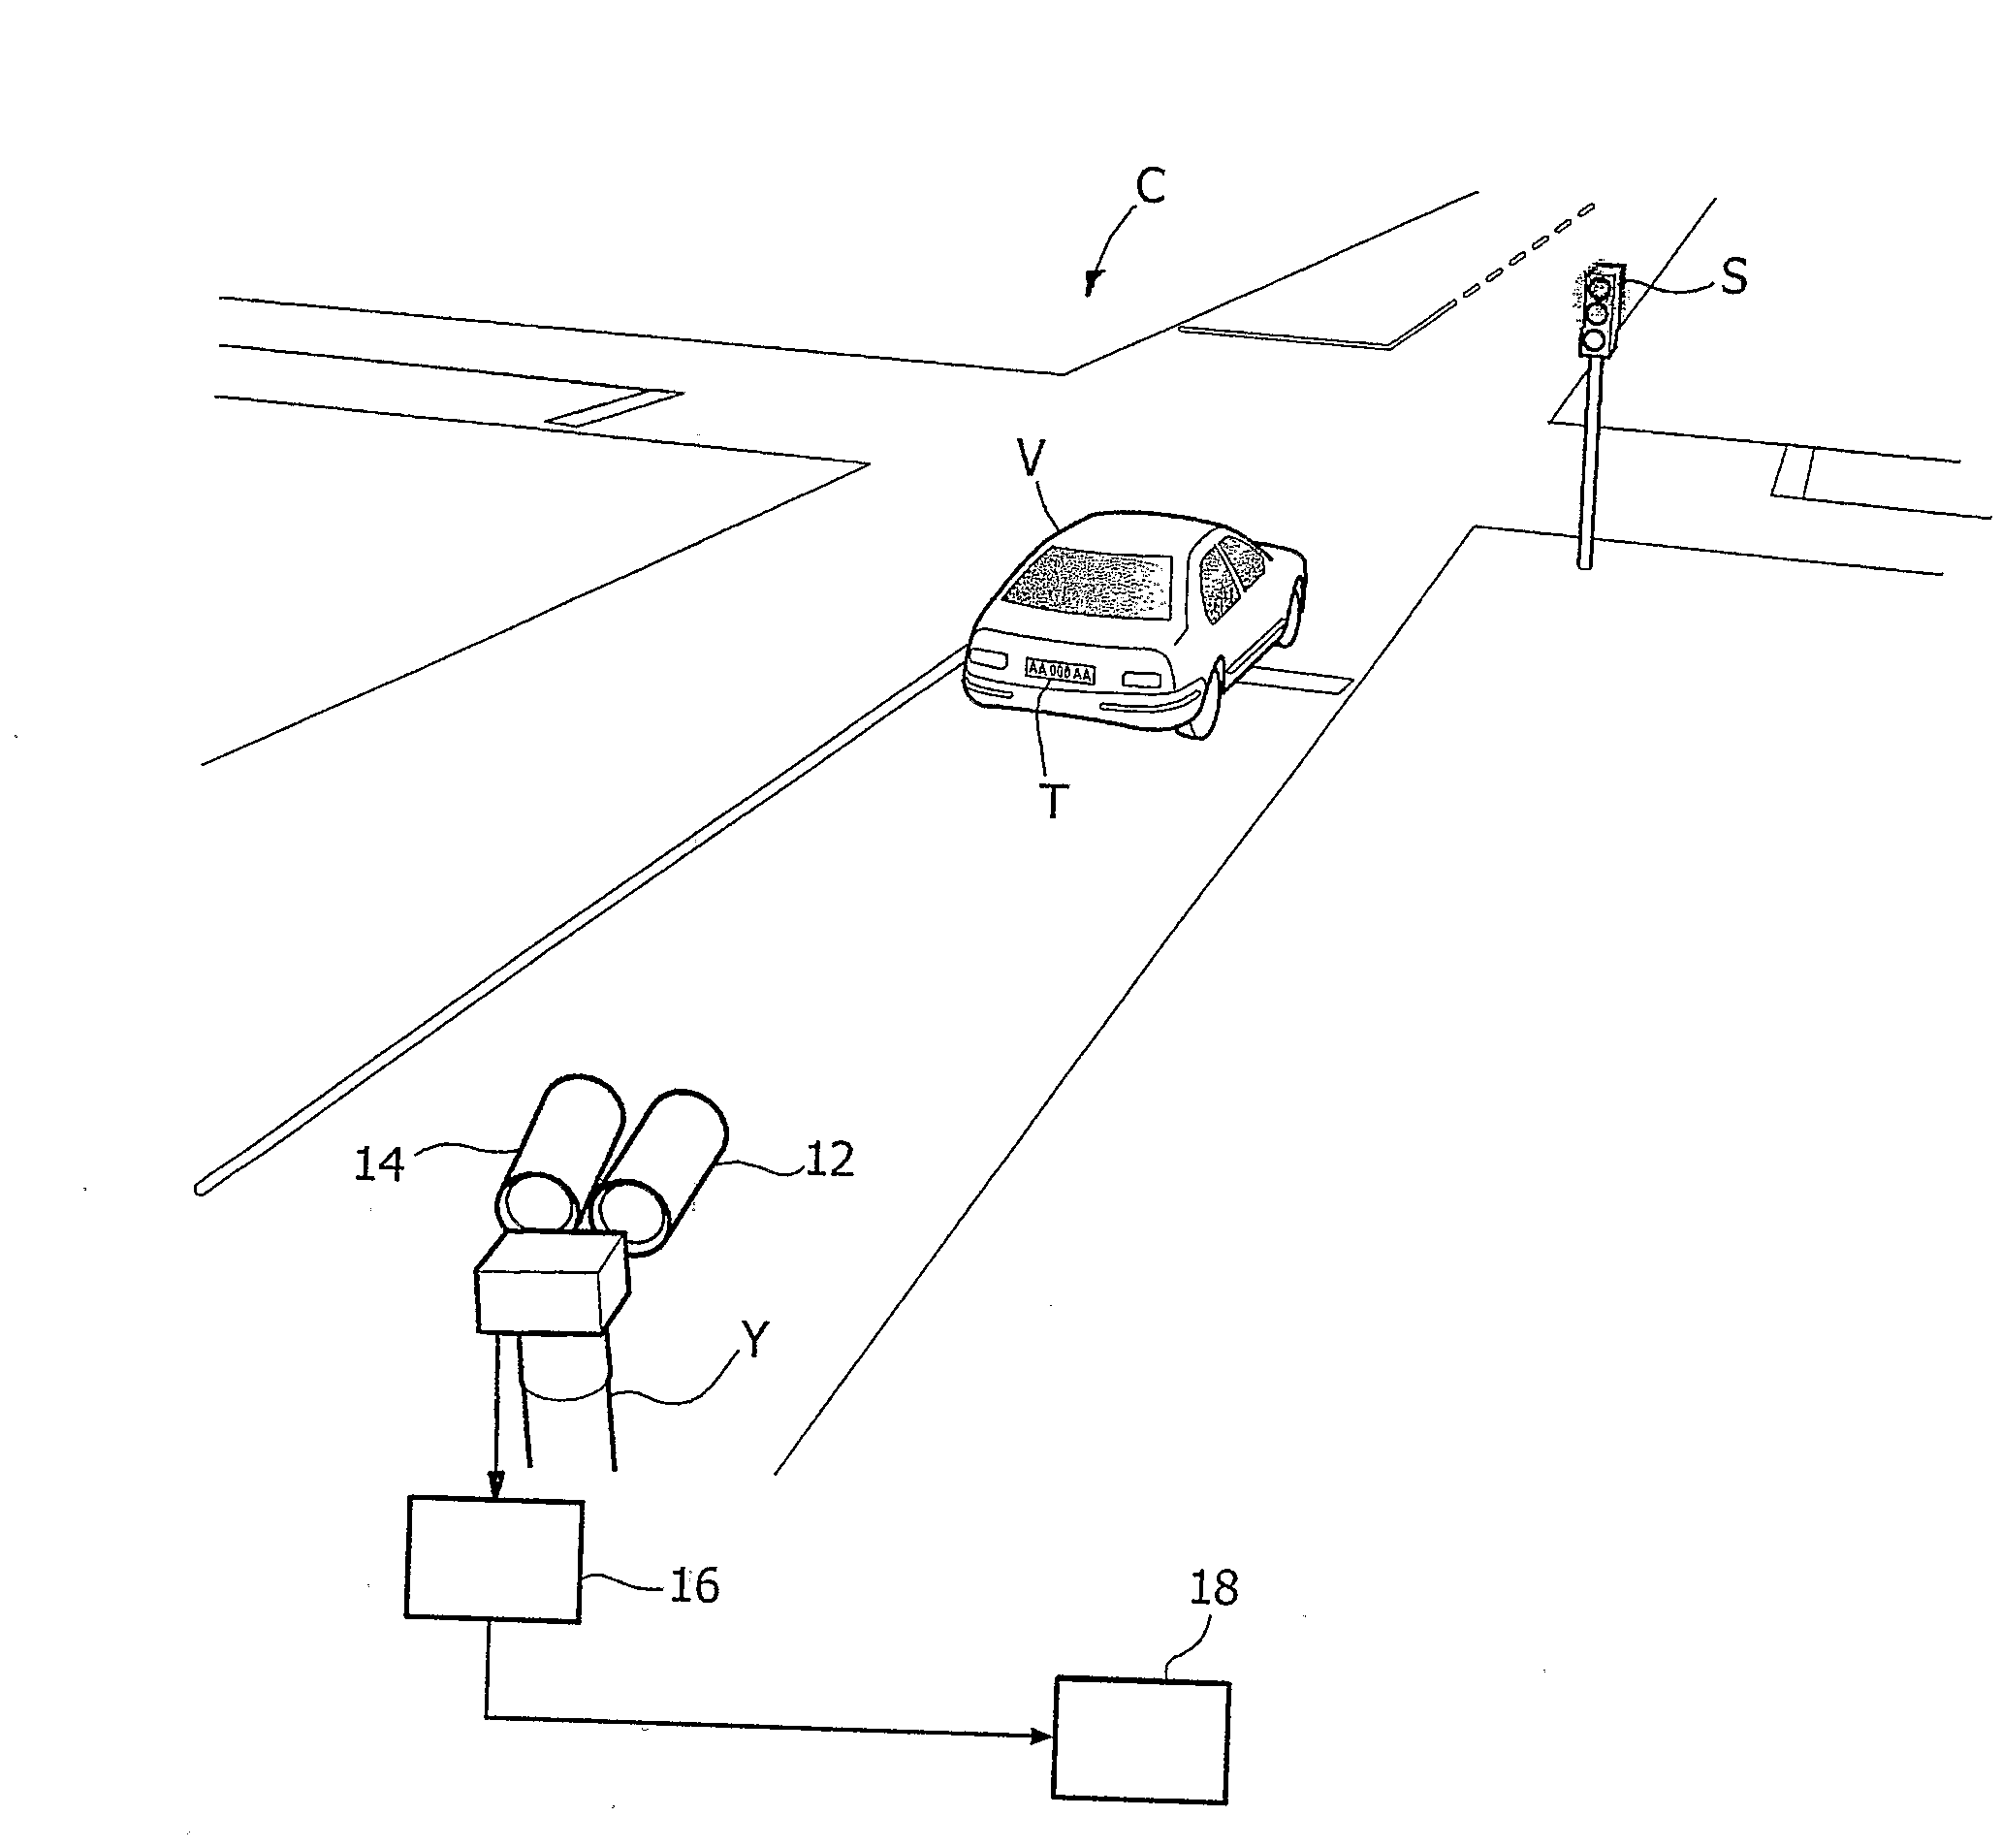 System for detecting vehicles